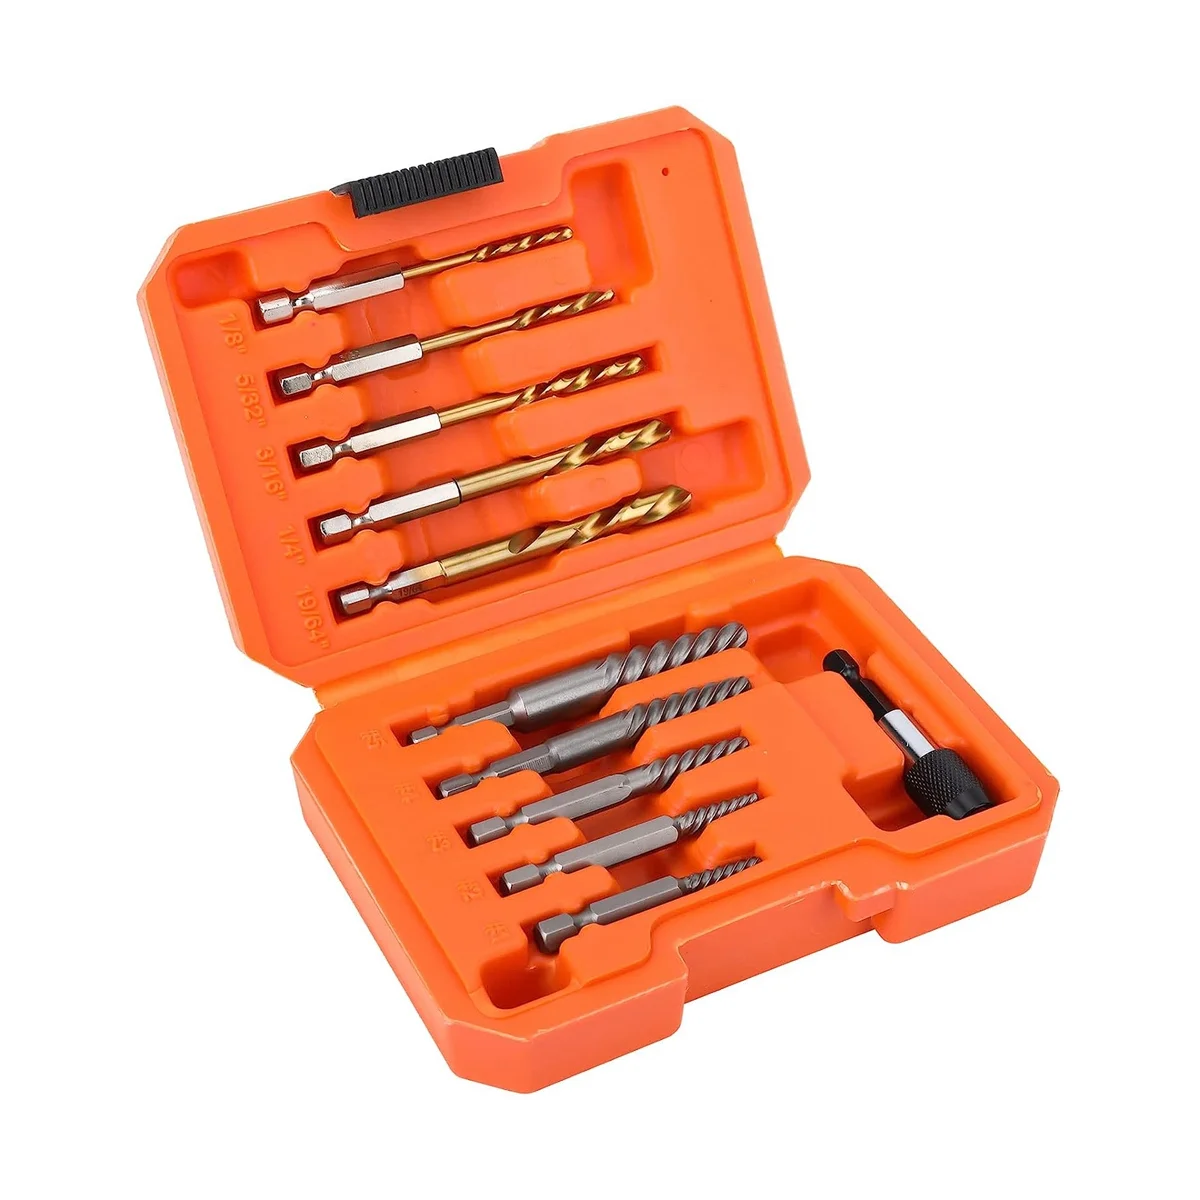 

10-Piece Screw Extractor Set and Universal Drill Bit Holder, Left Hand Drill Bit Set, for Removing Broken Studs, Bolts